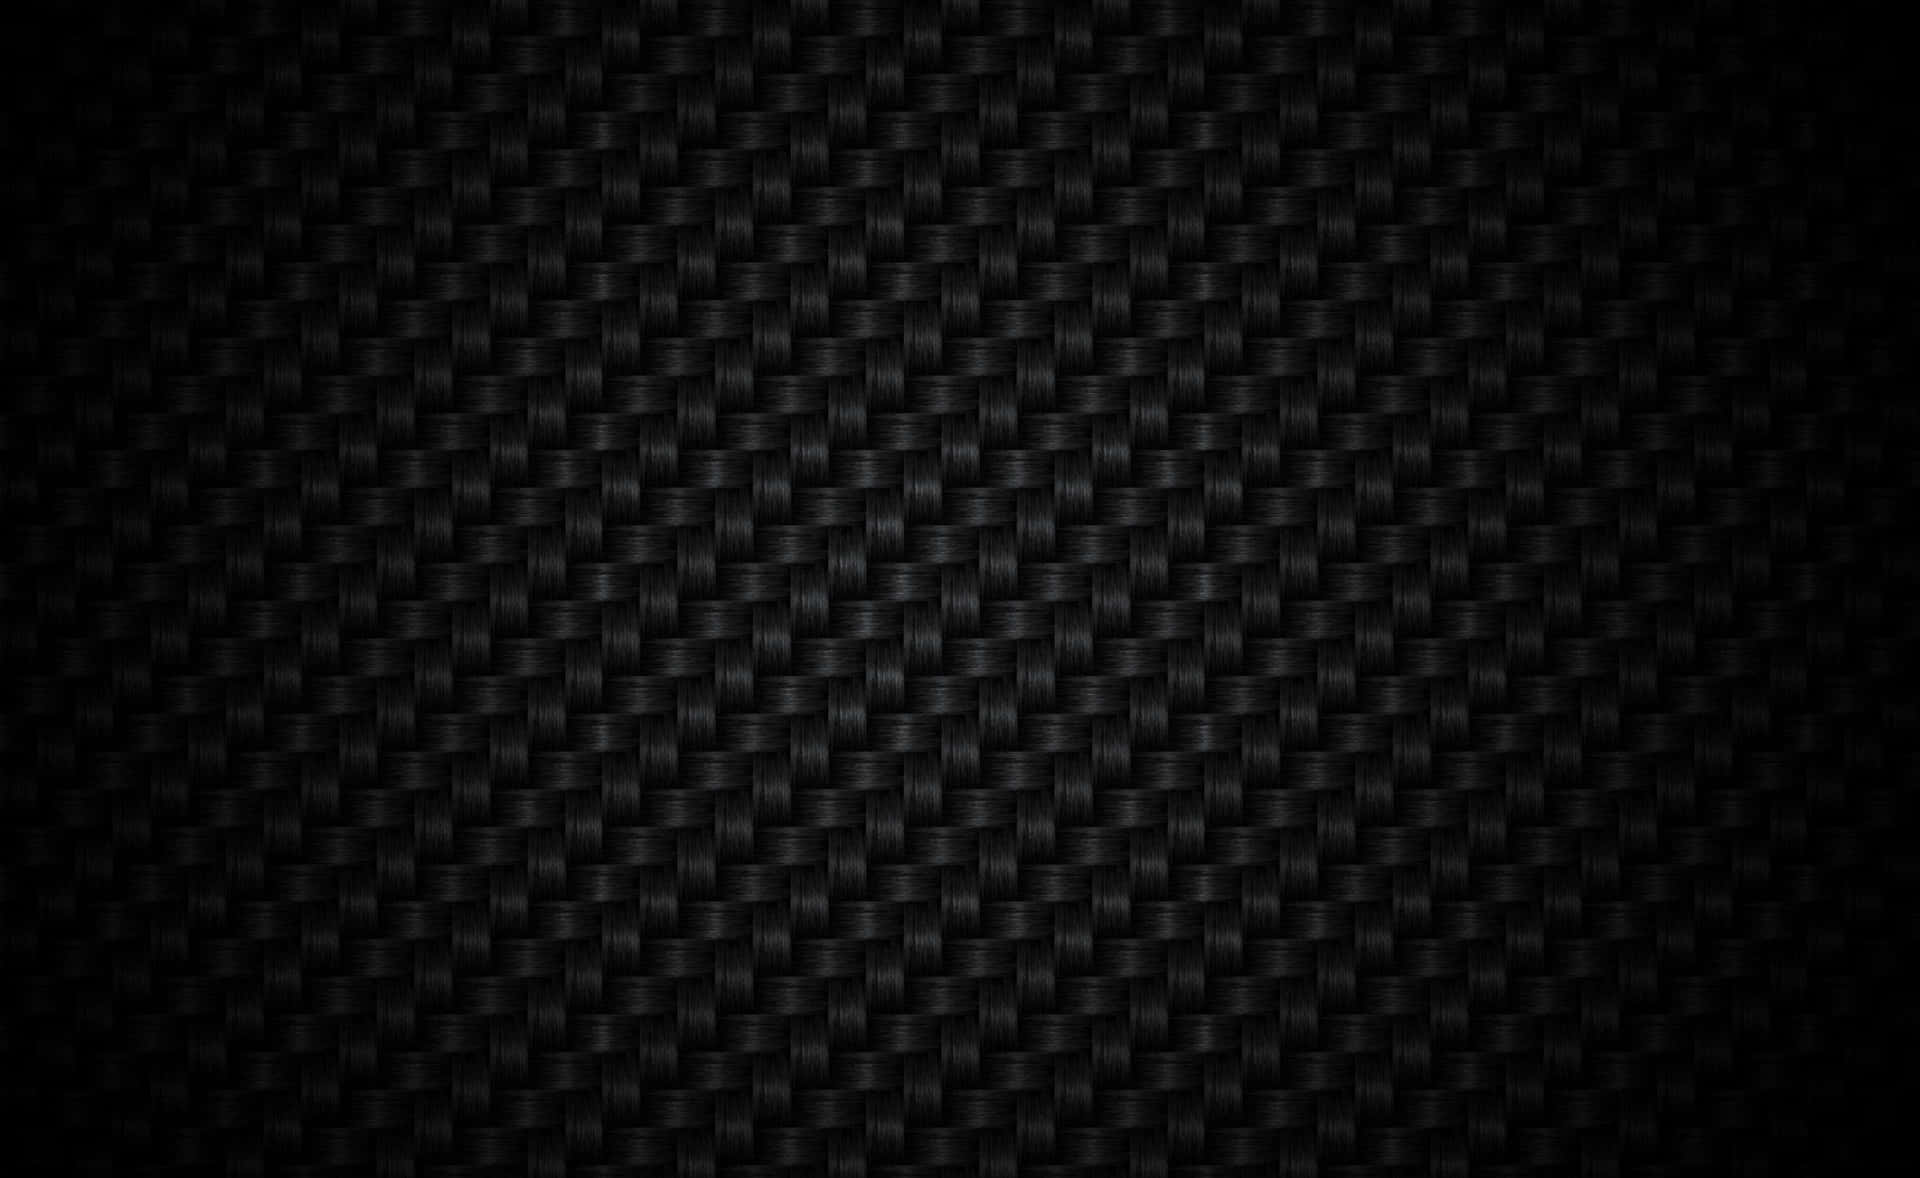 "A glimpse of an iconic carbon fiber background"